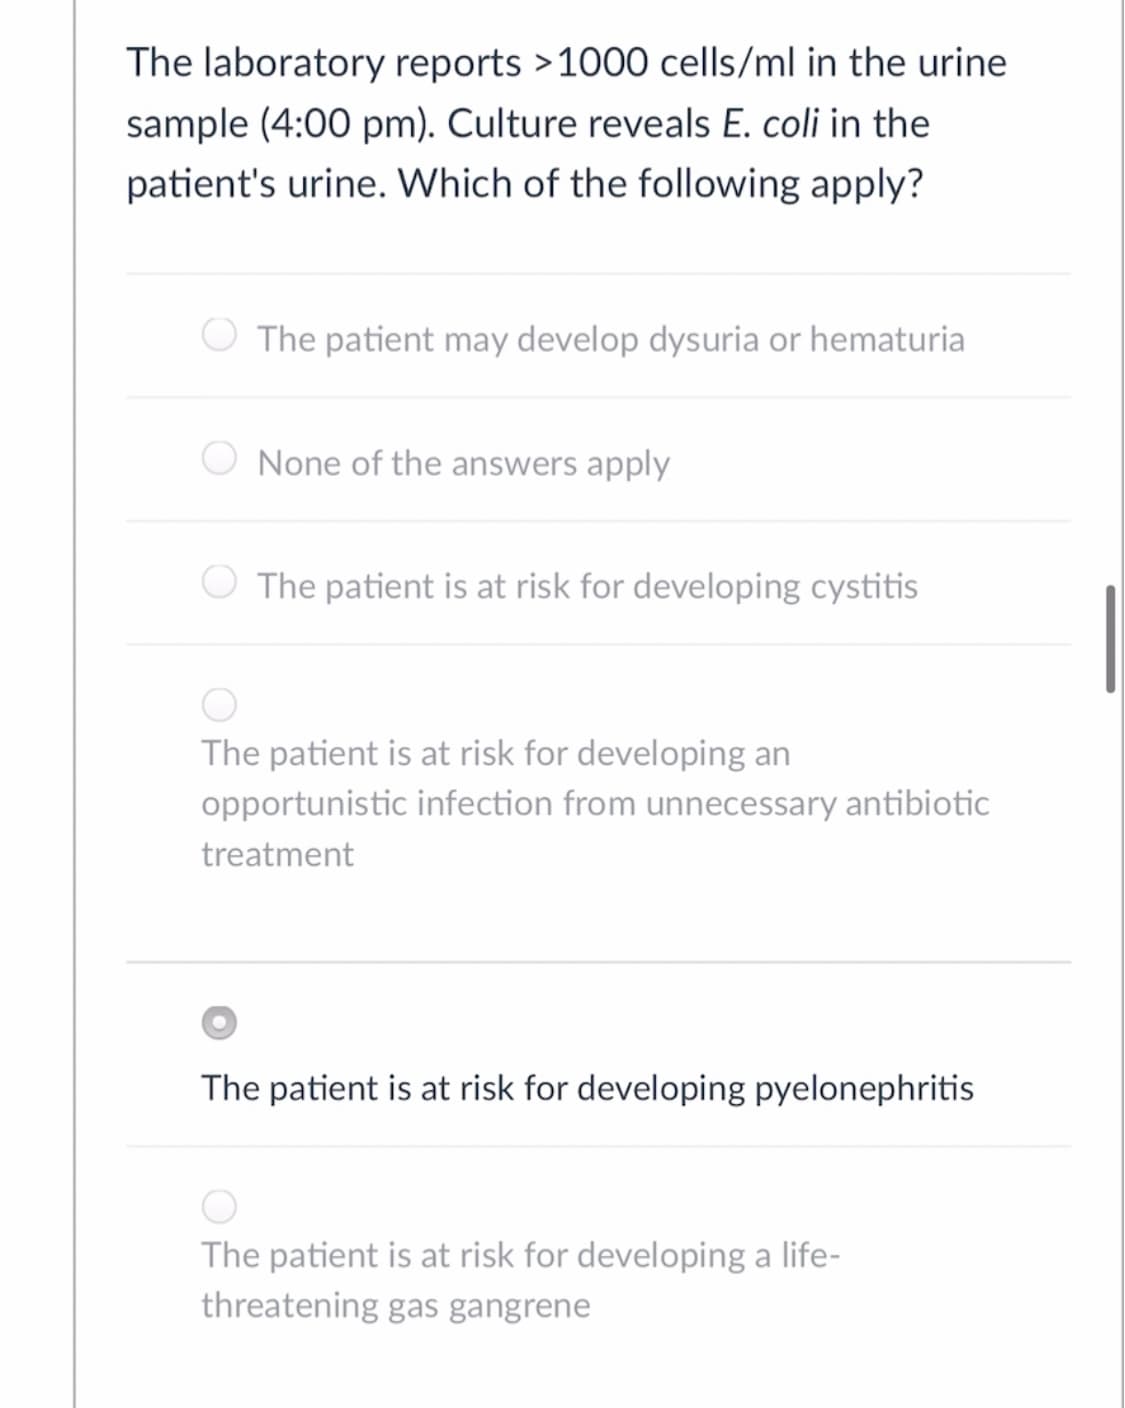 The laboratory reports >1000 cells/ml in the urine
sample (4:00 pm). Culture reveals E. coli in the
patient's urine. Which of the following apply?
The patient may develop dysuria or hematuria
None of the answers apply
The patient is at risk for developing cystitis
The patient is at risk for developing an
opportunistic infection from unnecessary antibiotic
treatment
The patient is at risk for developing pyelonephritis
The patient is at risk for developing a life-
threatening gas gangrene
